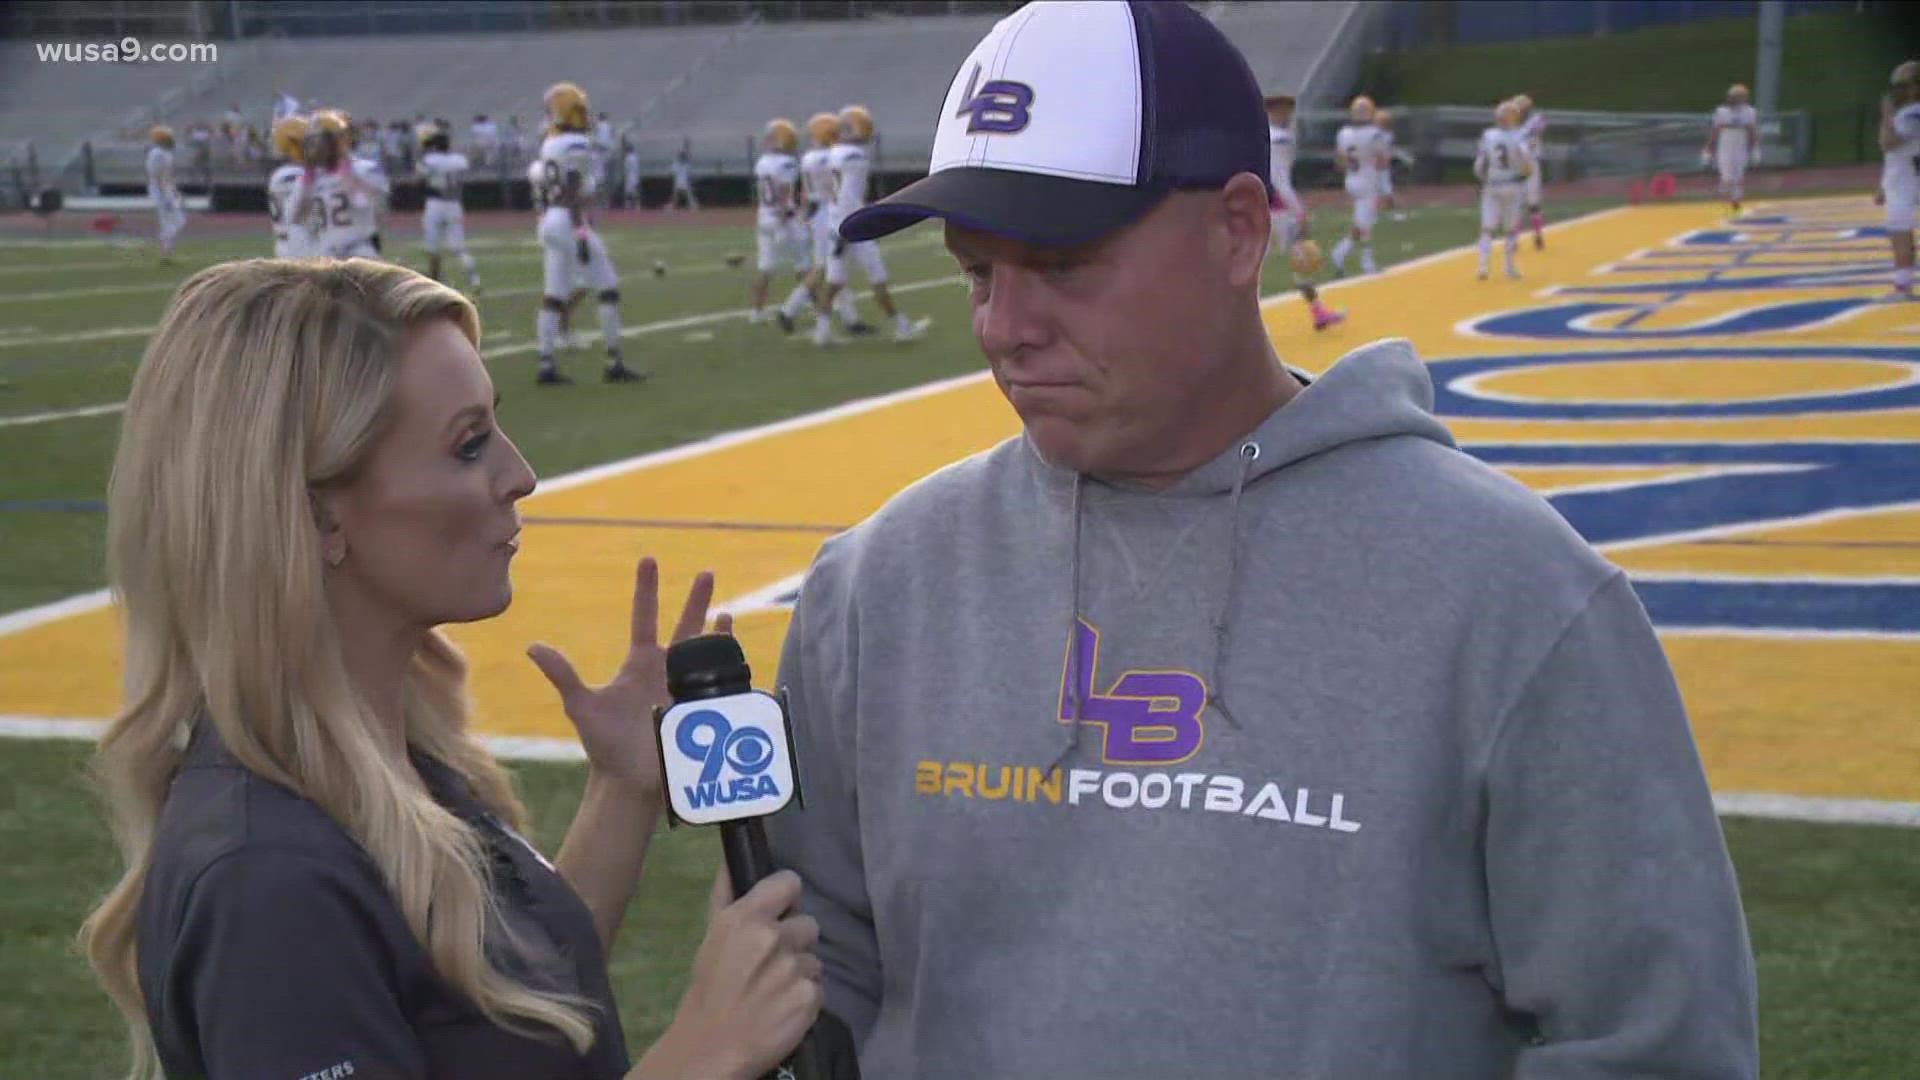 The Lake Braddock Bruins took on the Robison Rams in the Battle of Burke for WUSA9’s Game of the Week.